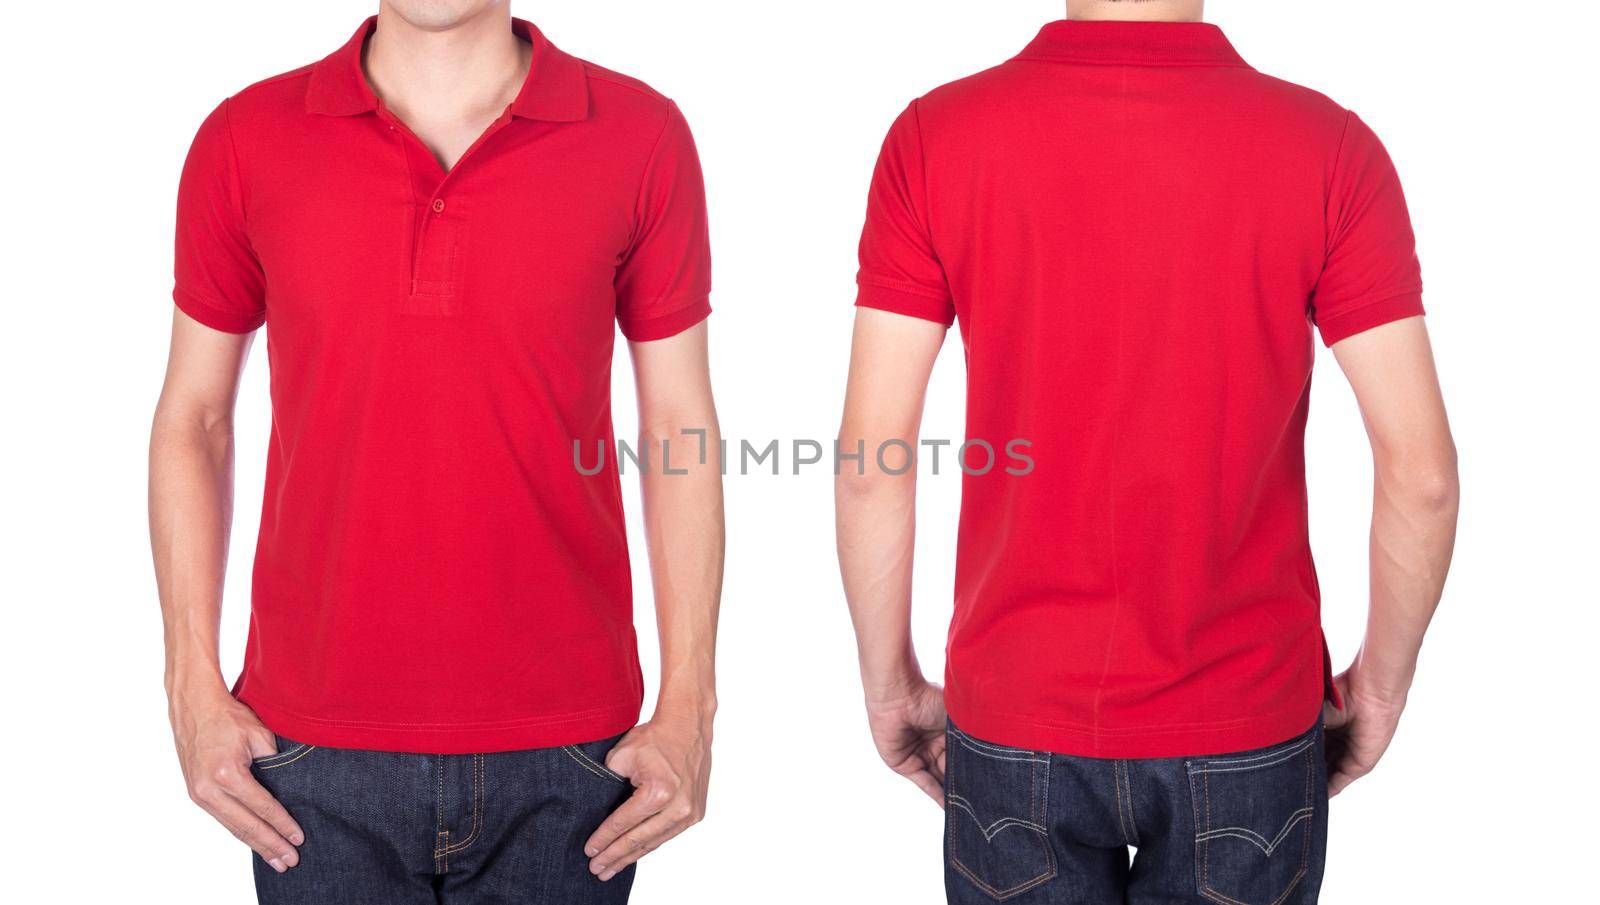 man with red polo shirt on white background by geargodz